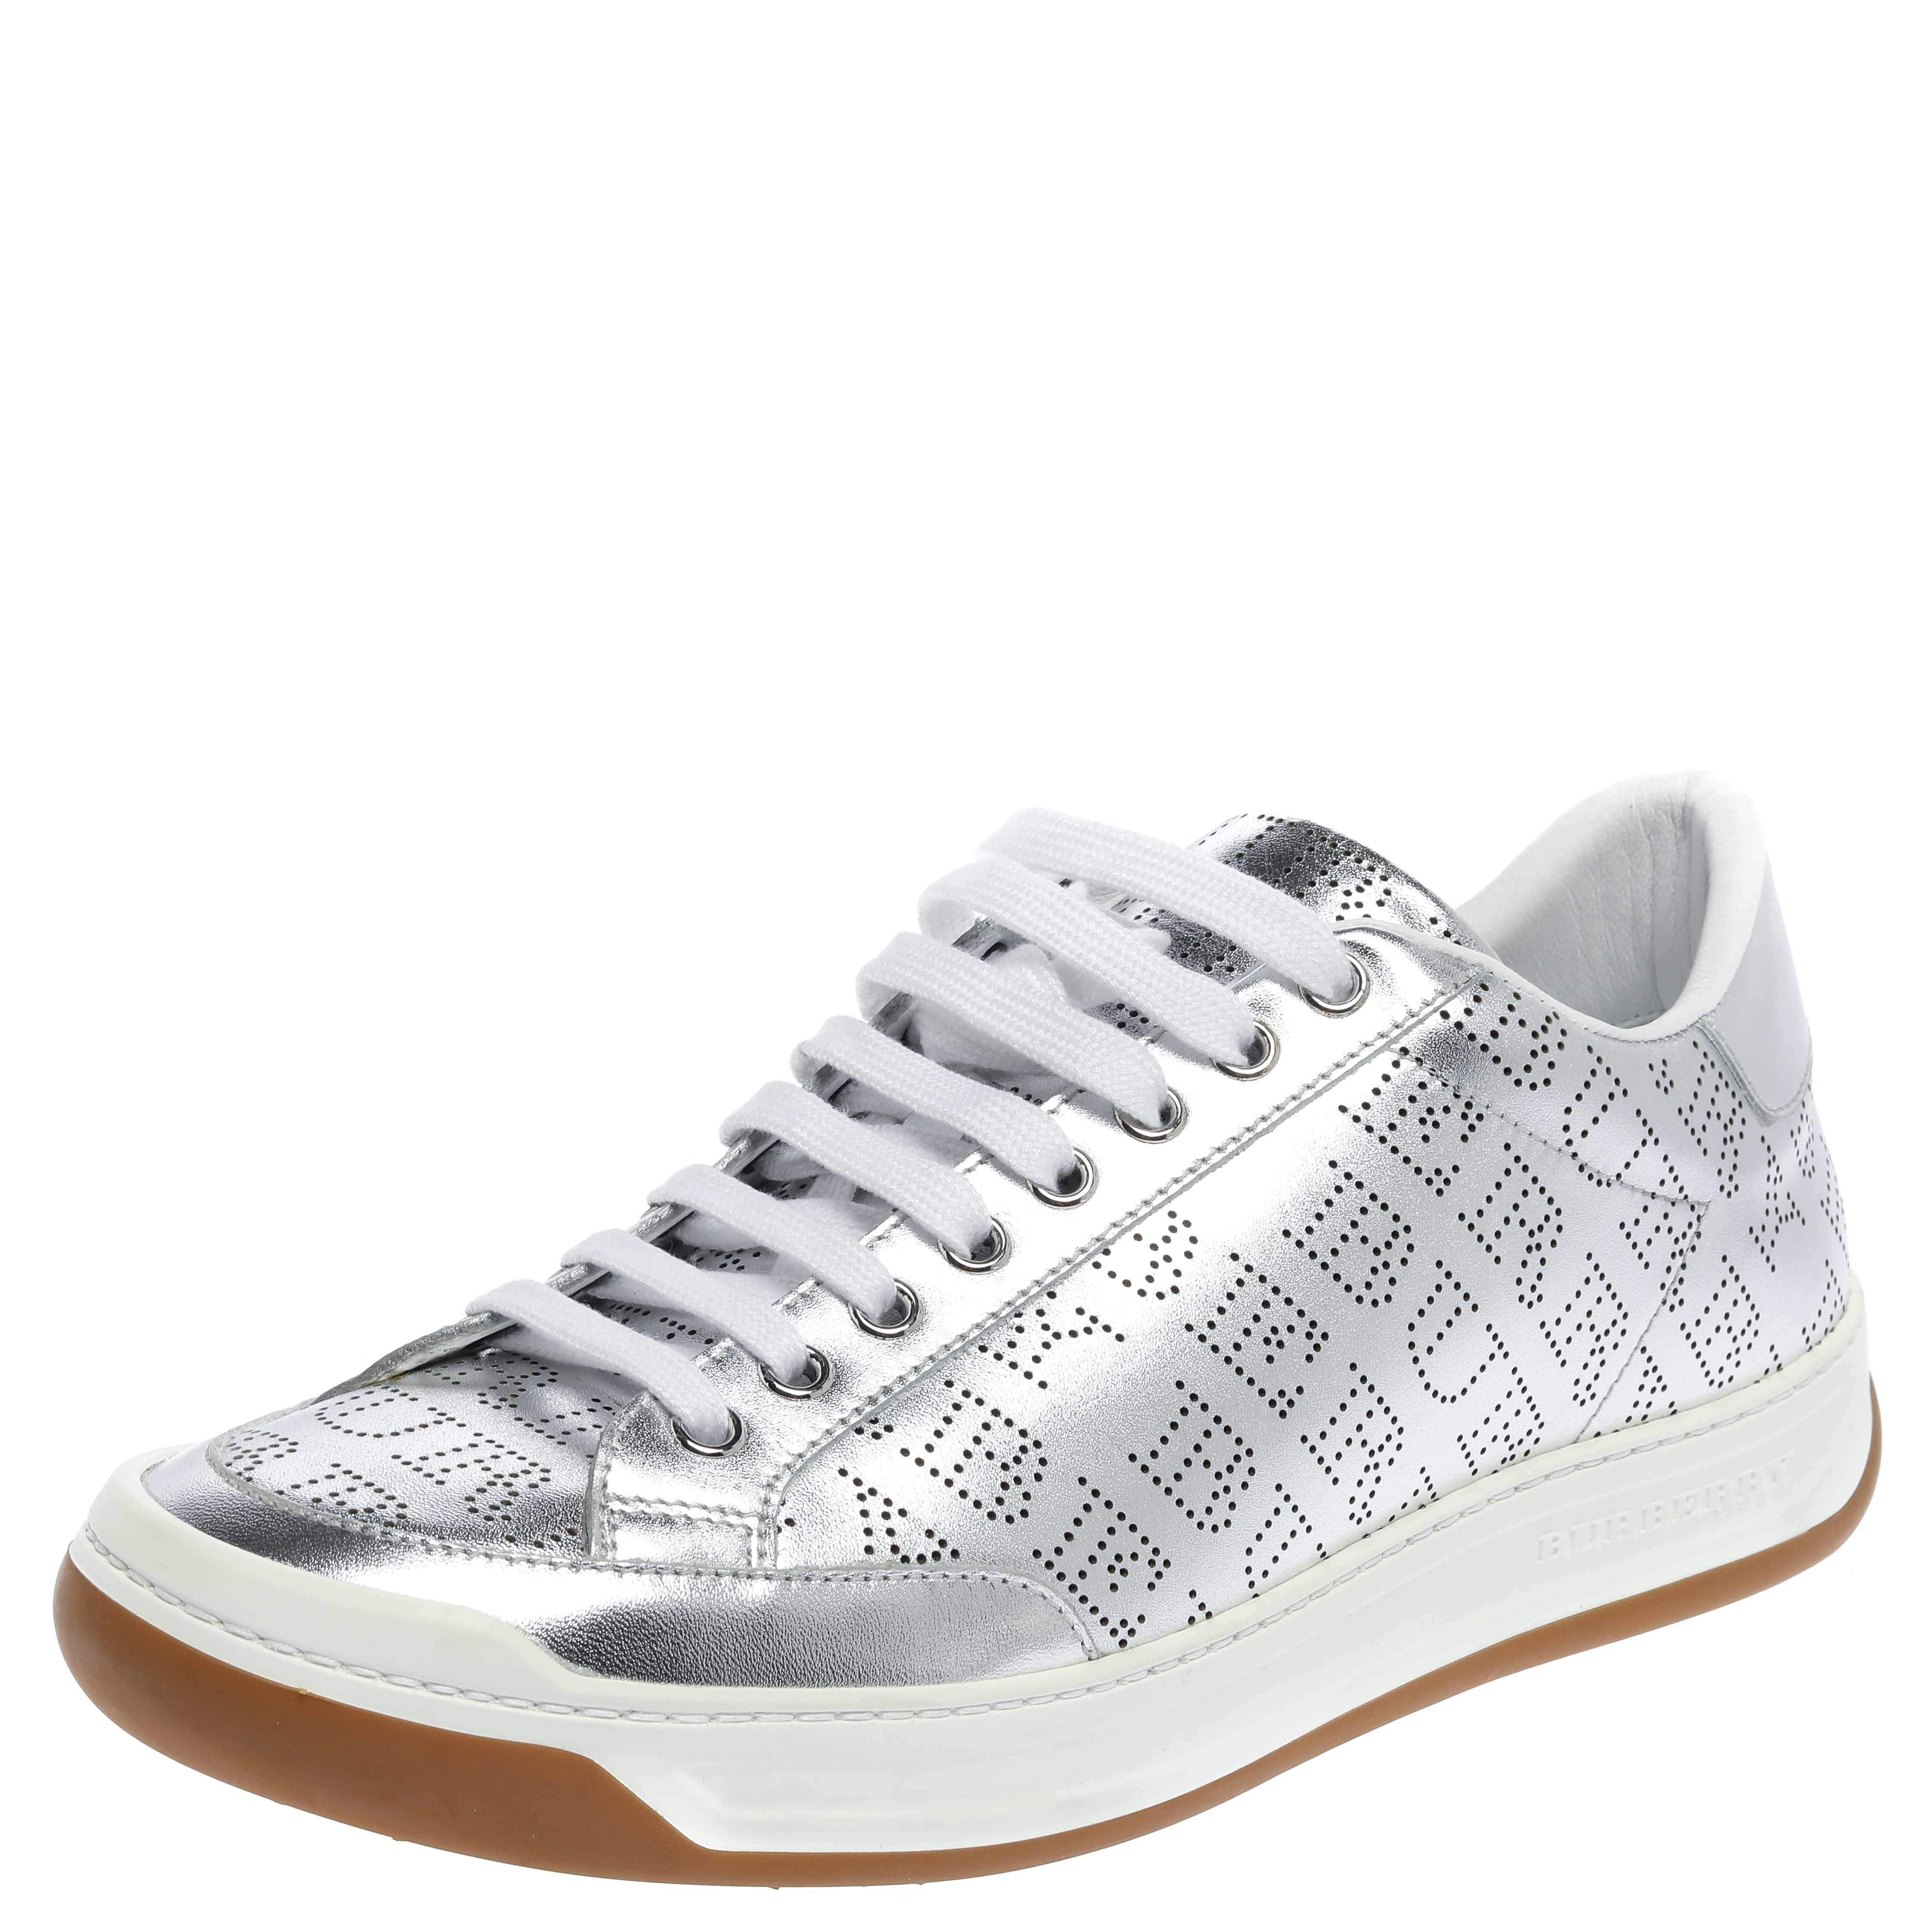 Burberry Silver Perforated Leather Timsbury Low Top Sneakers Size 41